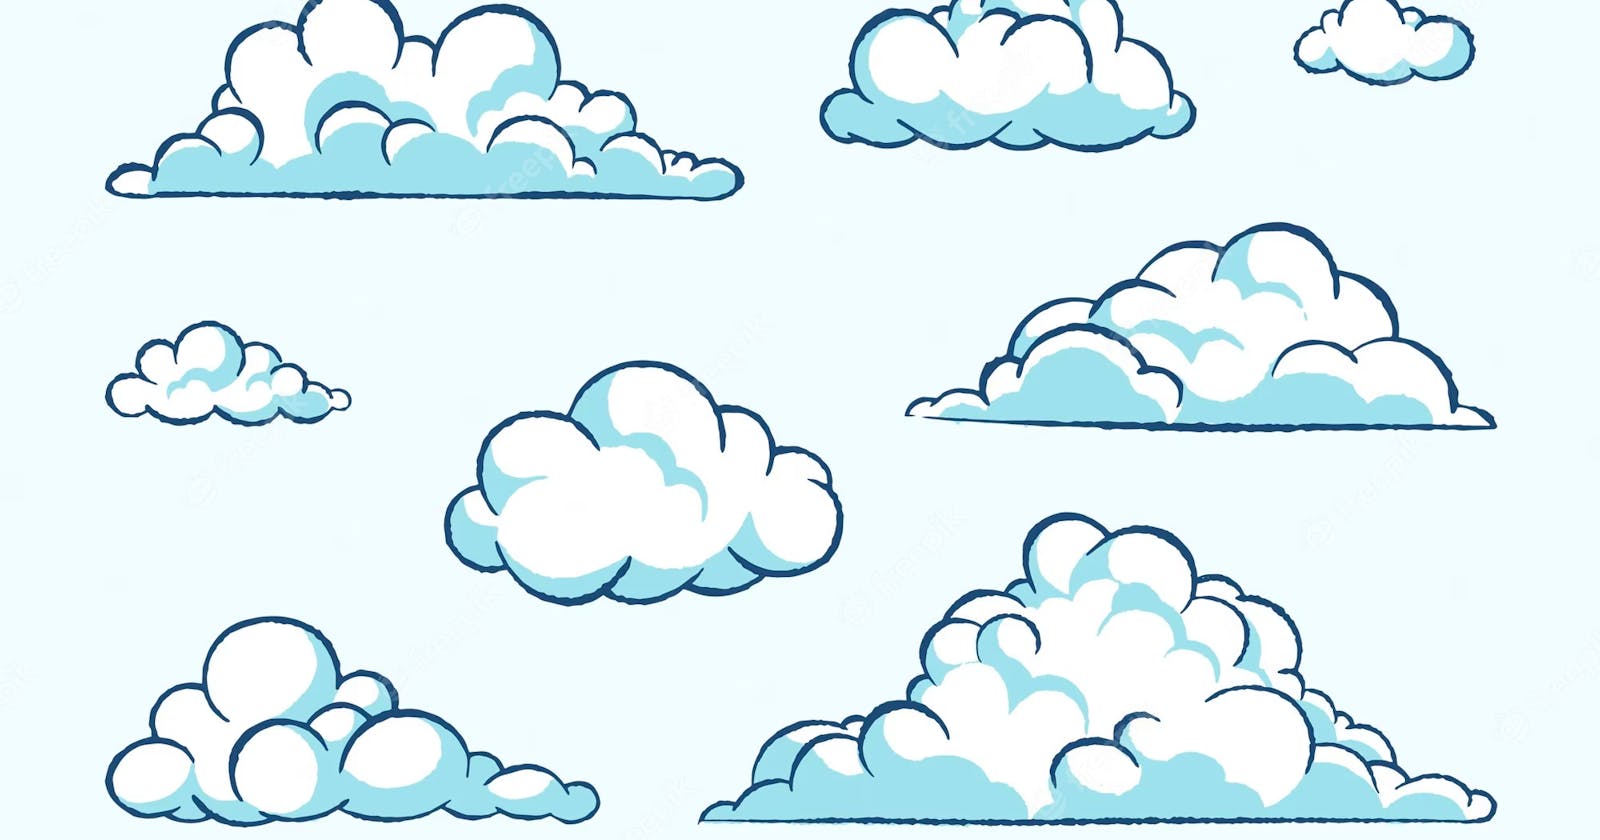 Cloud Computing: The Future is in the Clouds